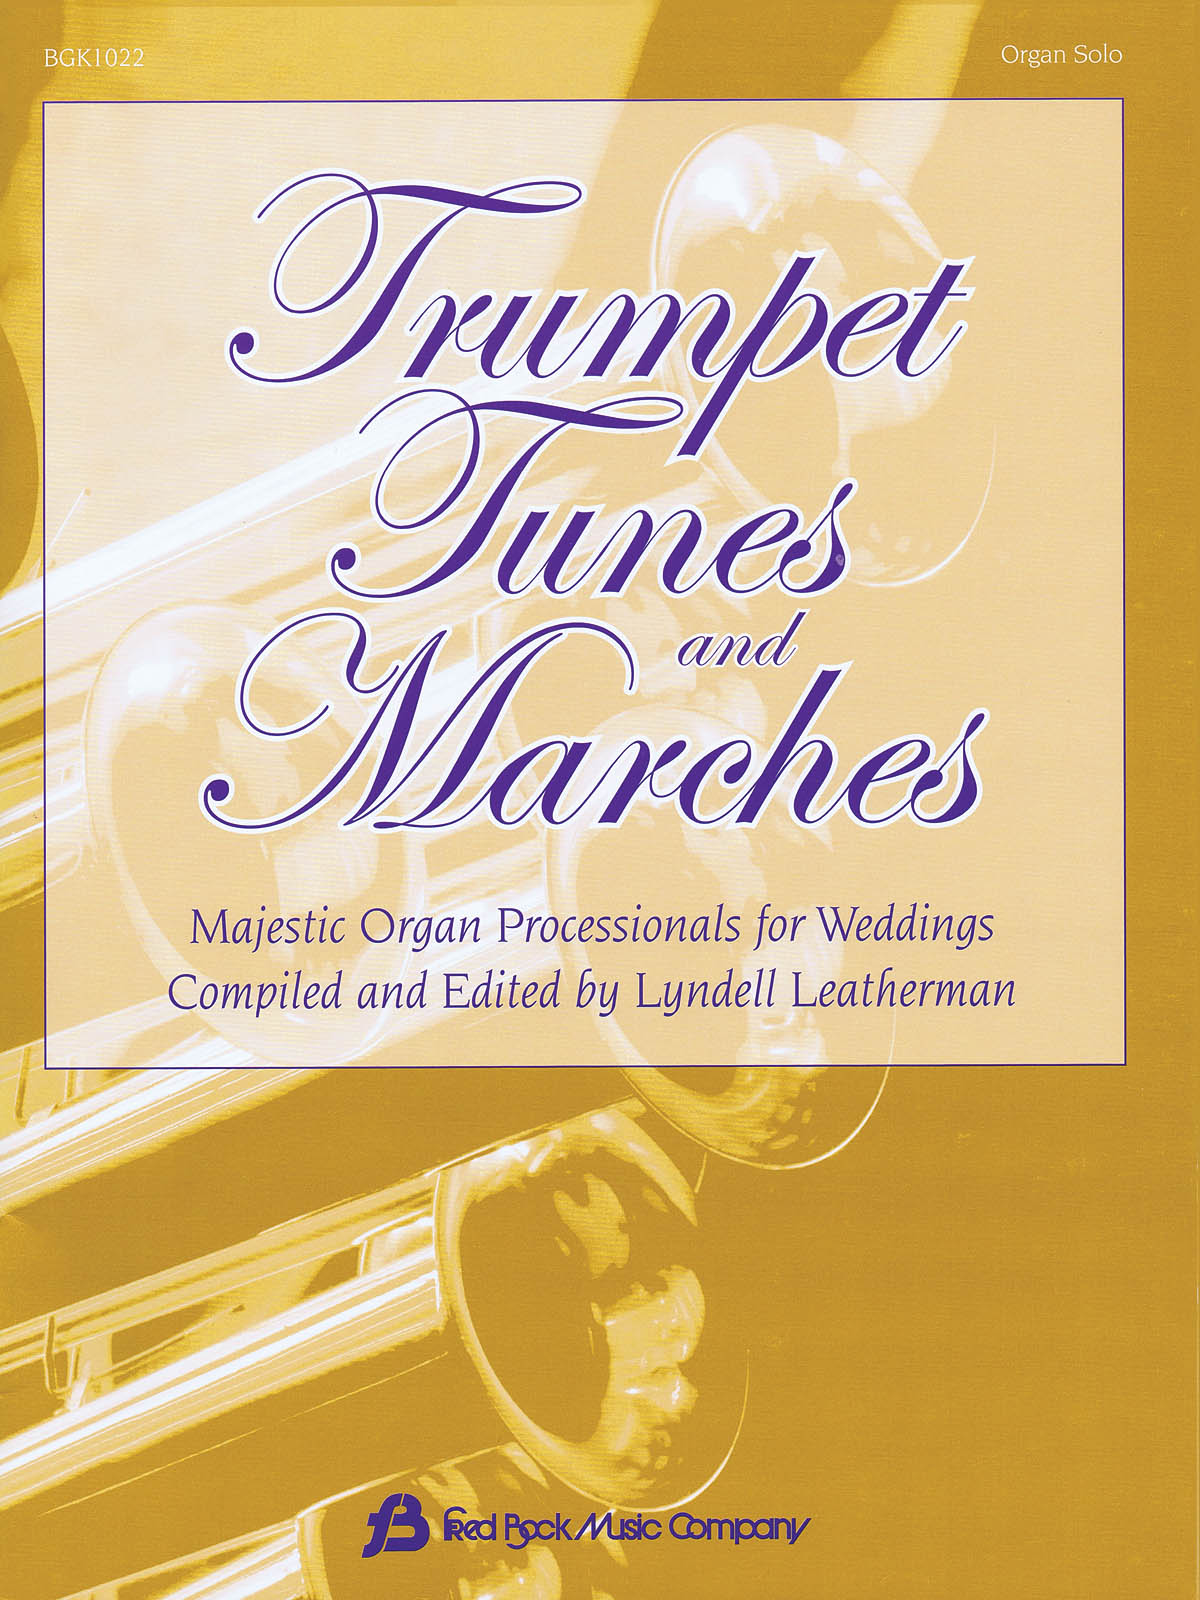 Trumpet Tunes and Marches for Weddings